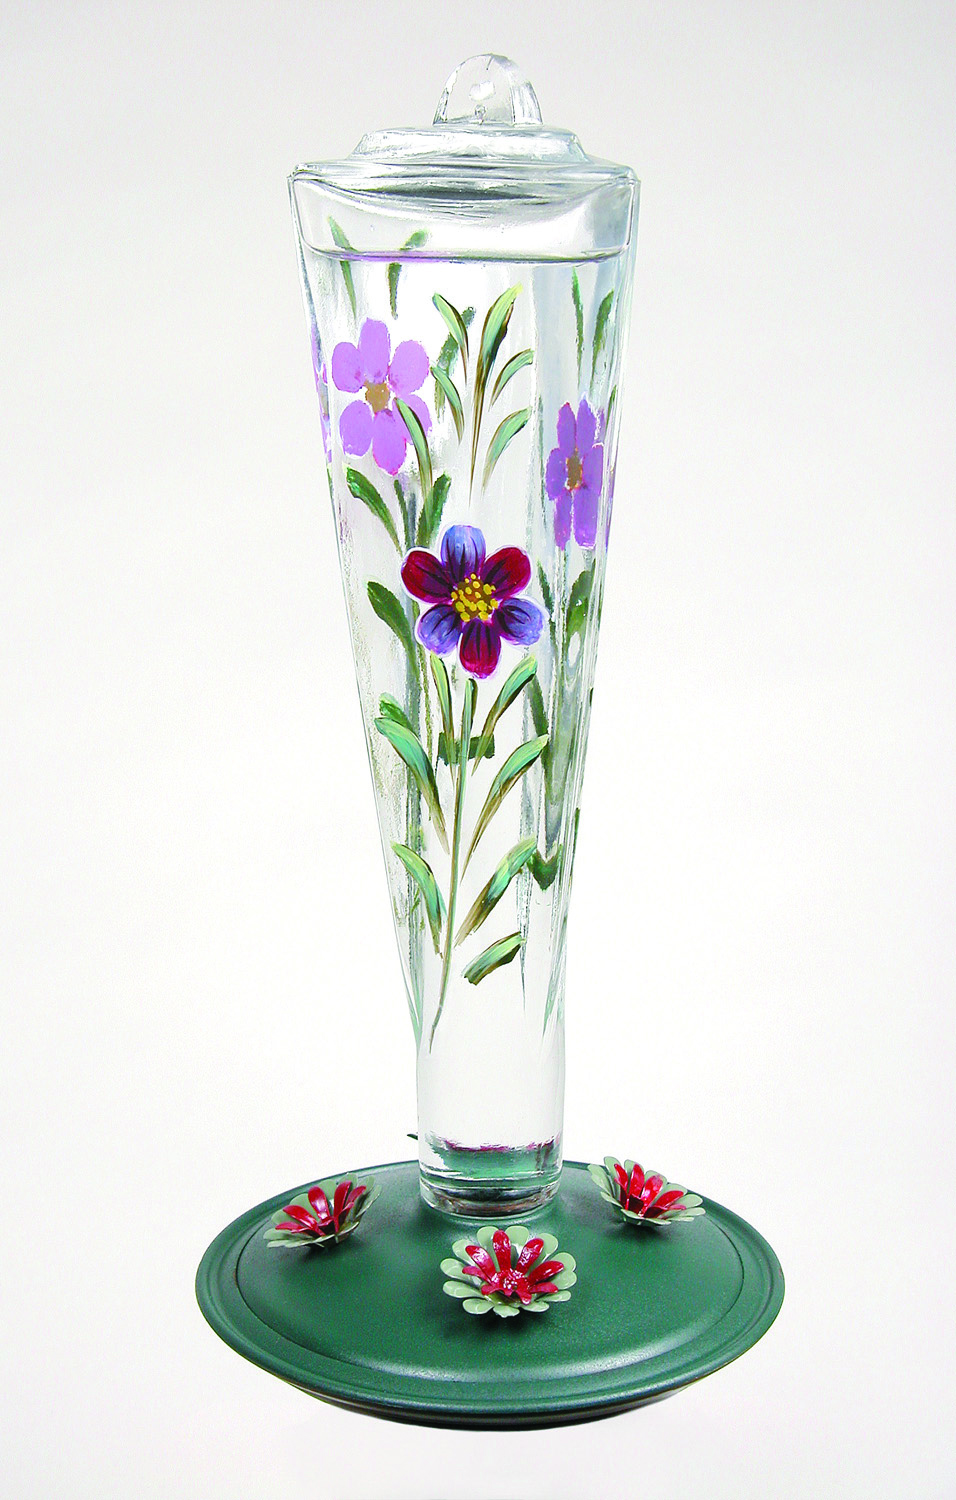 Violet Meadows Glass Hummingbird Feeder - Hand-painted fluted gl